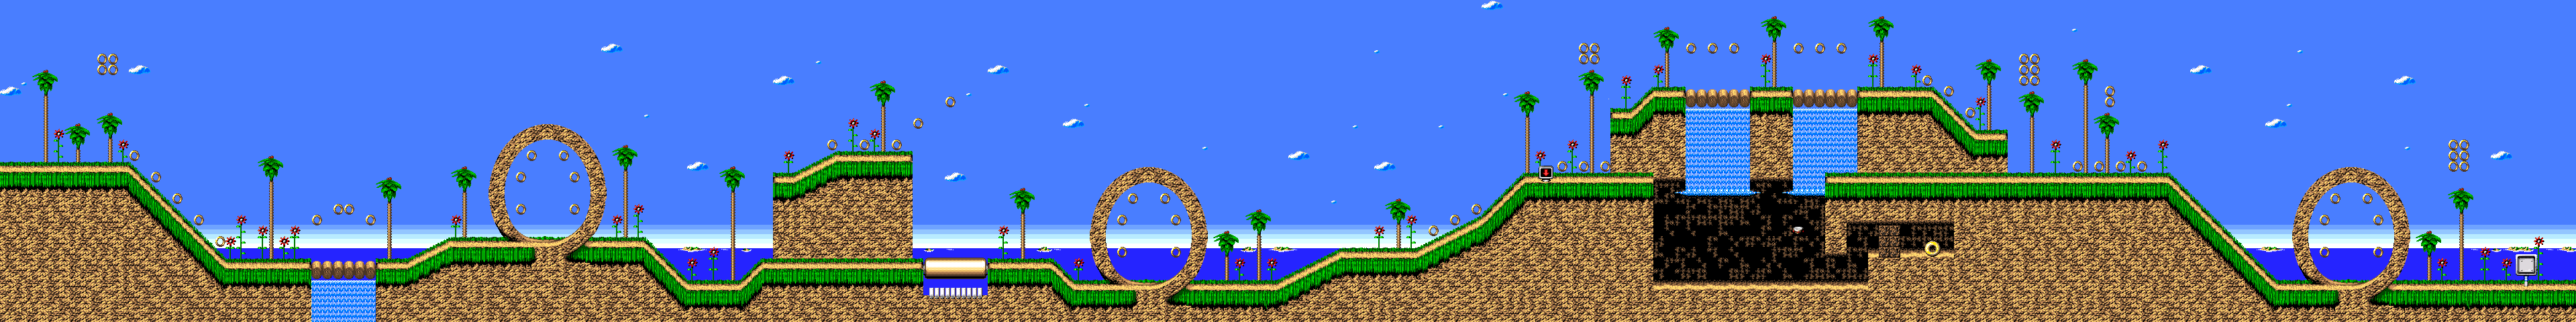 Green Hill Zone (Sonic the Hedgehog), Sonic Wiki Zone